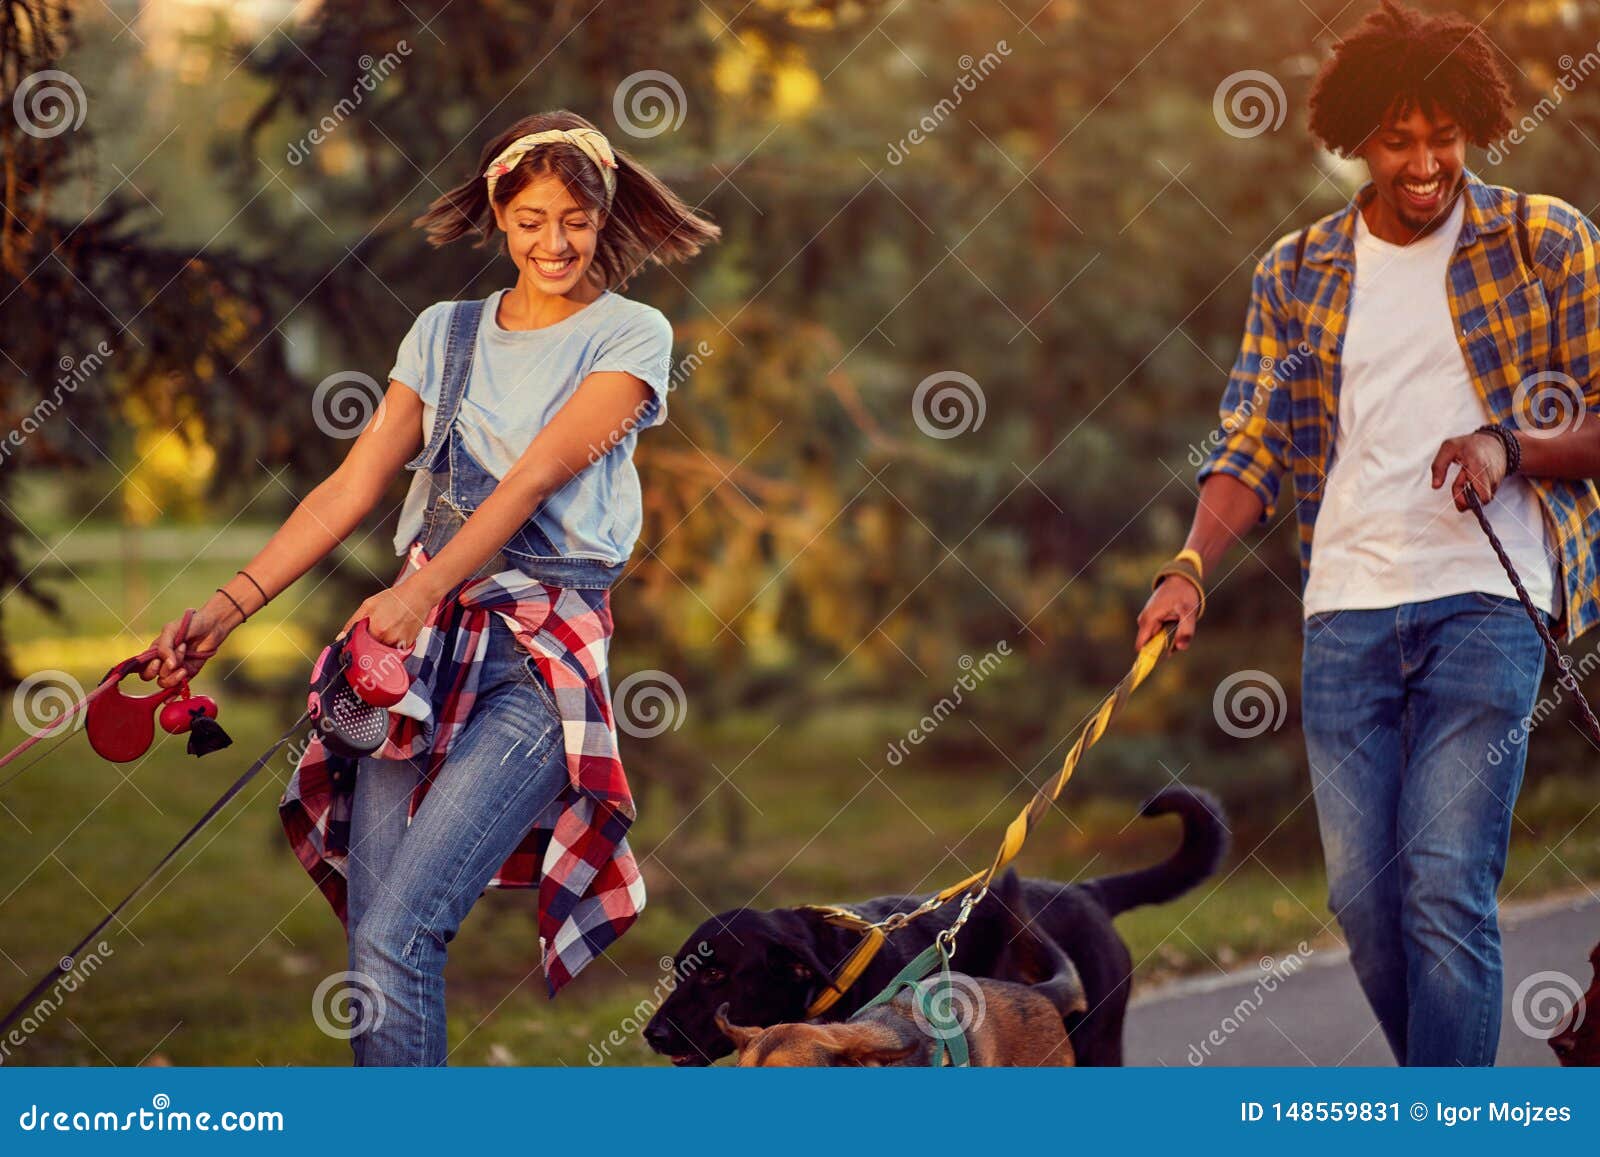 professional man and woman dog walkers with dog enjoying in park